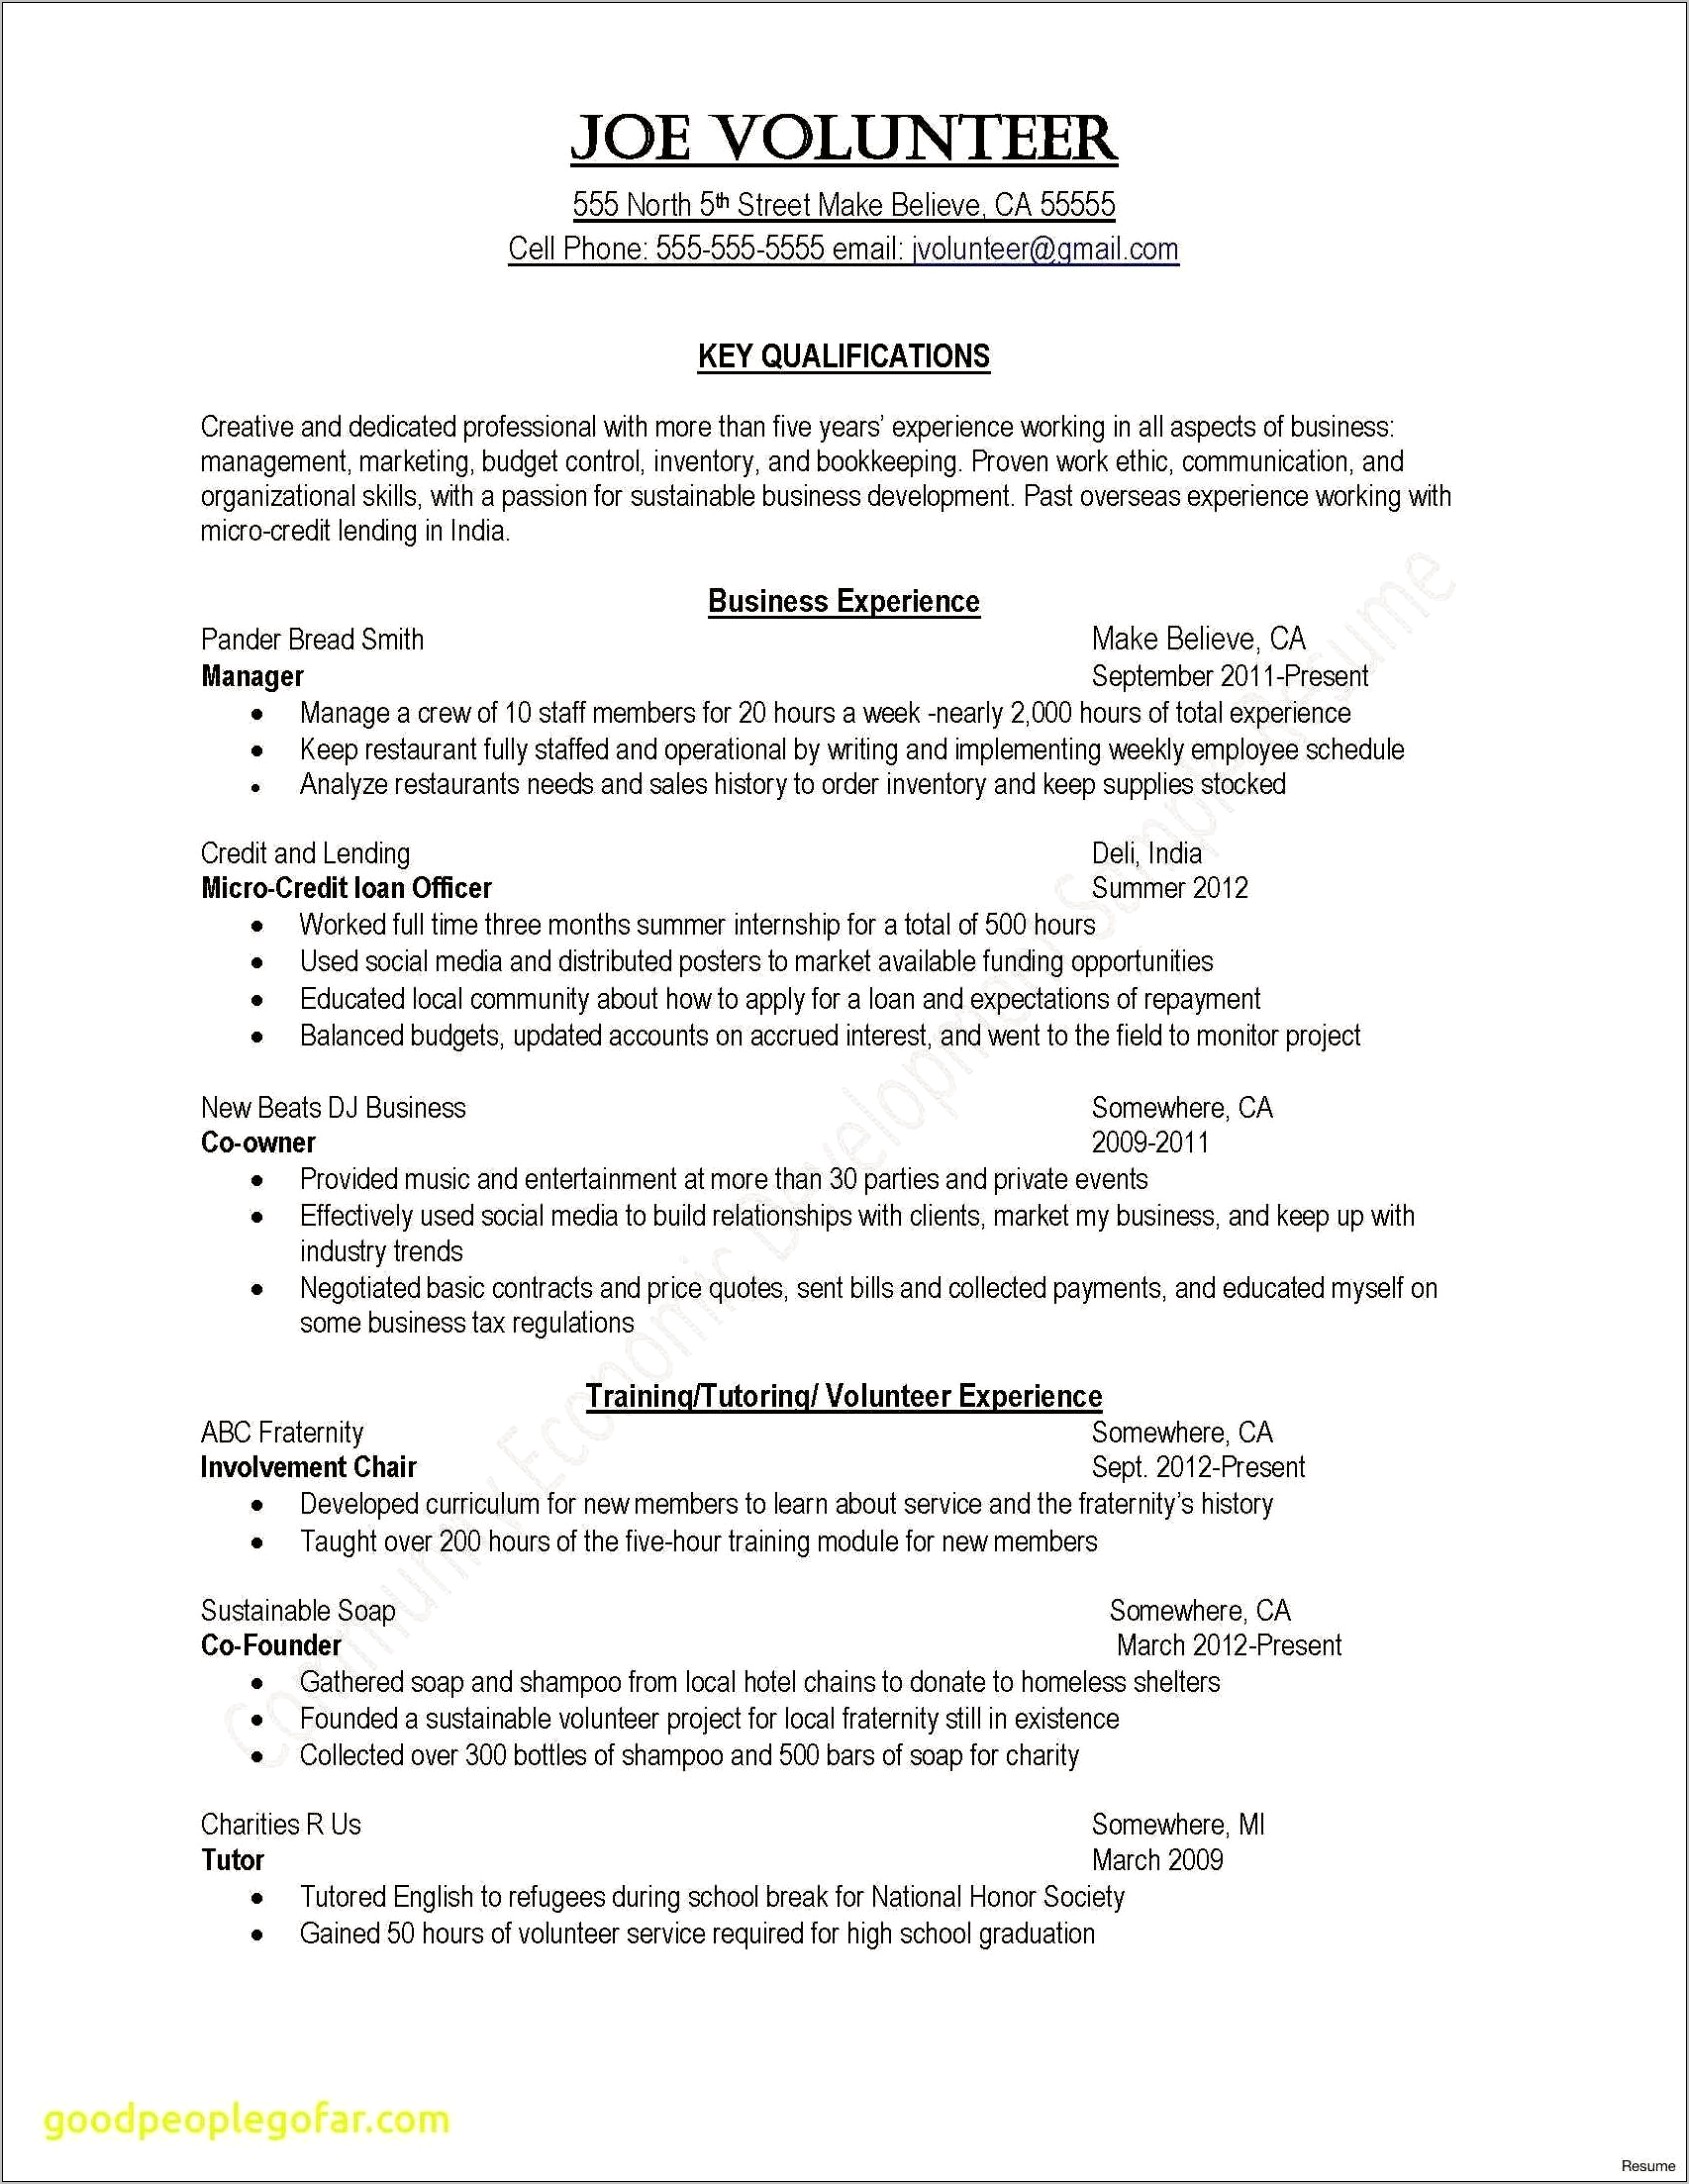 Resume Objective For Cell Phone Sales